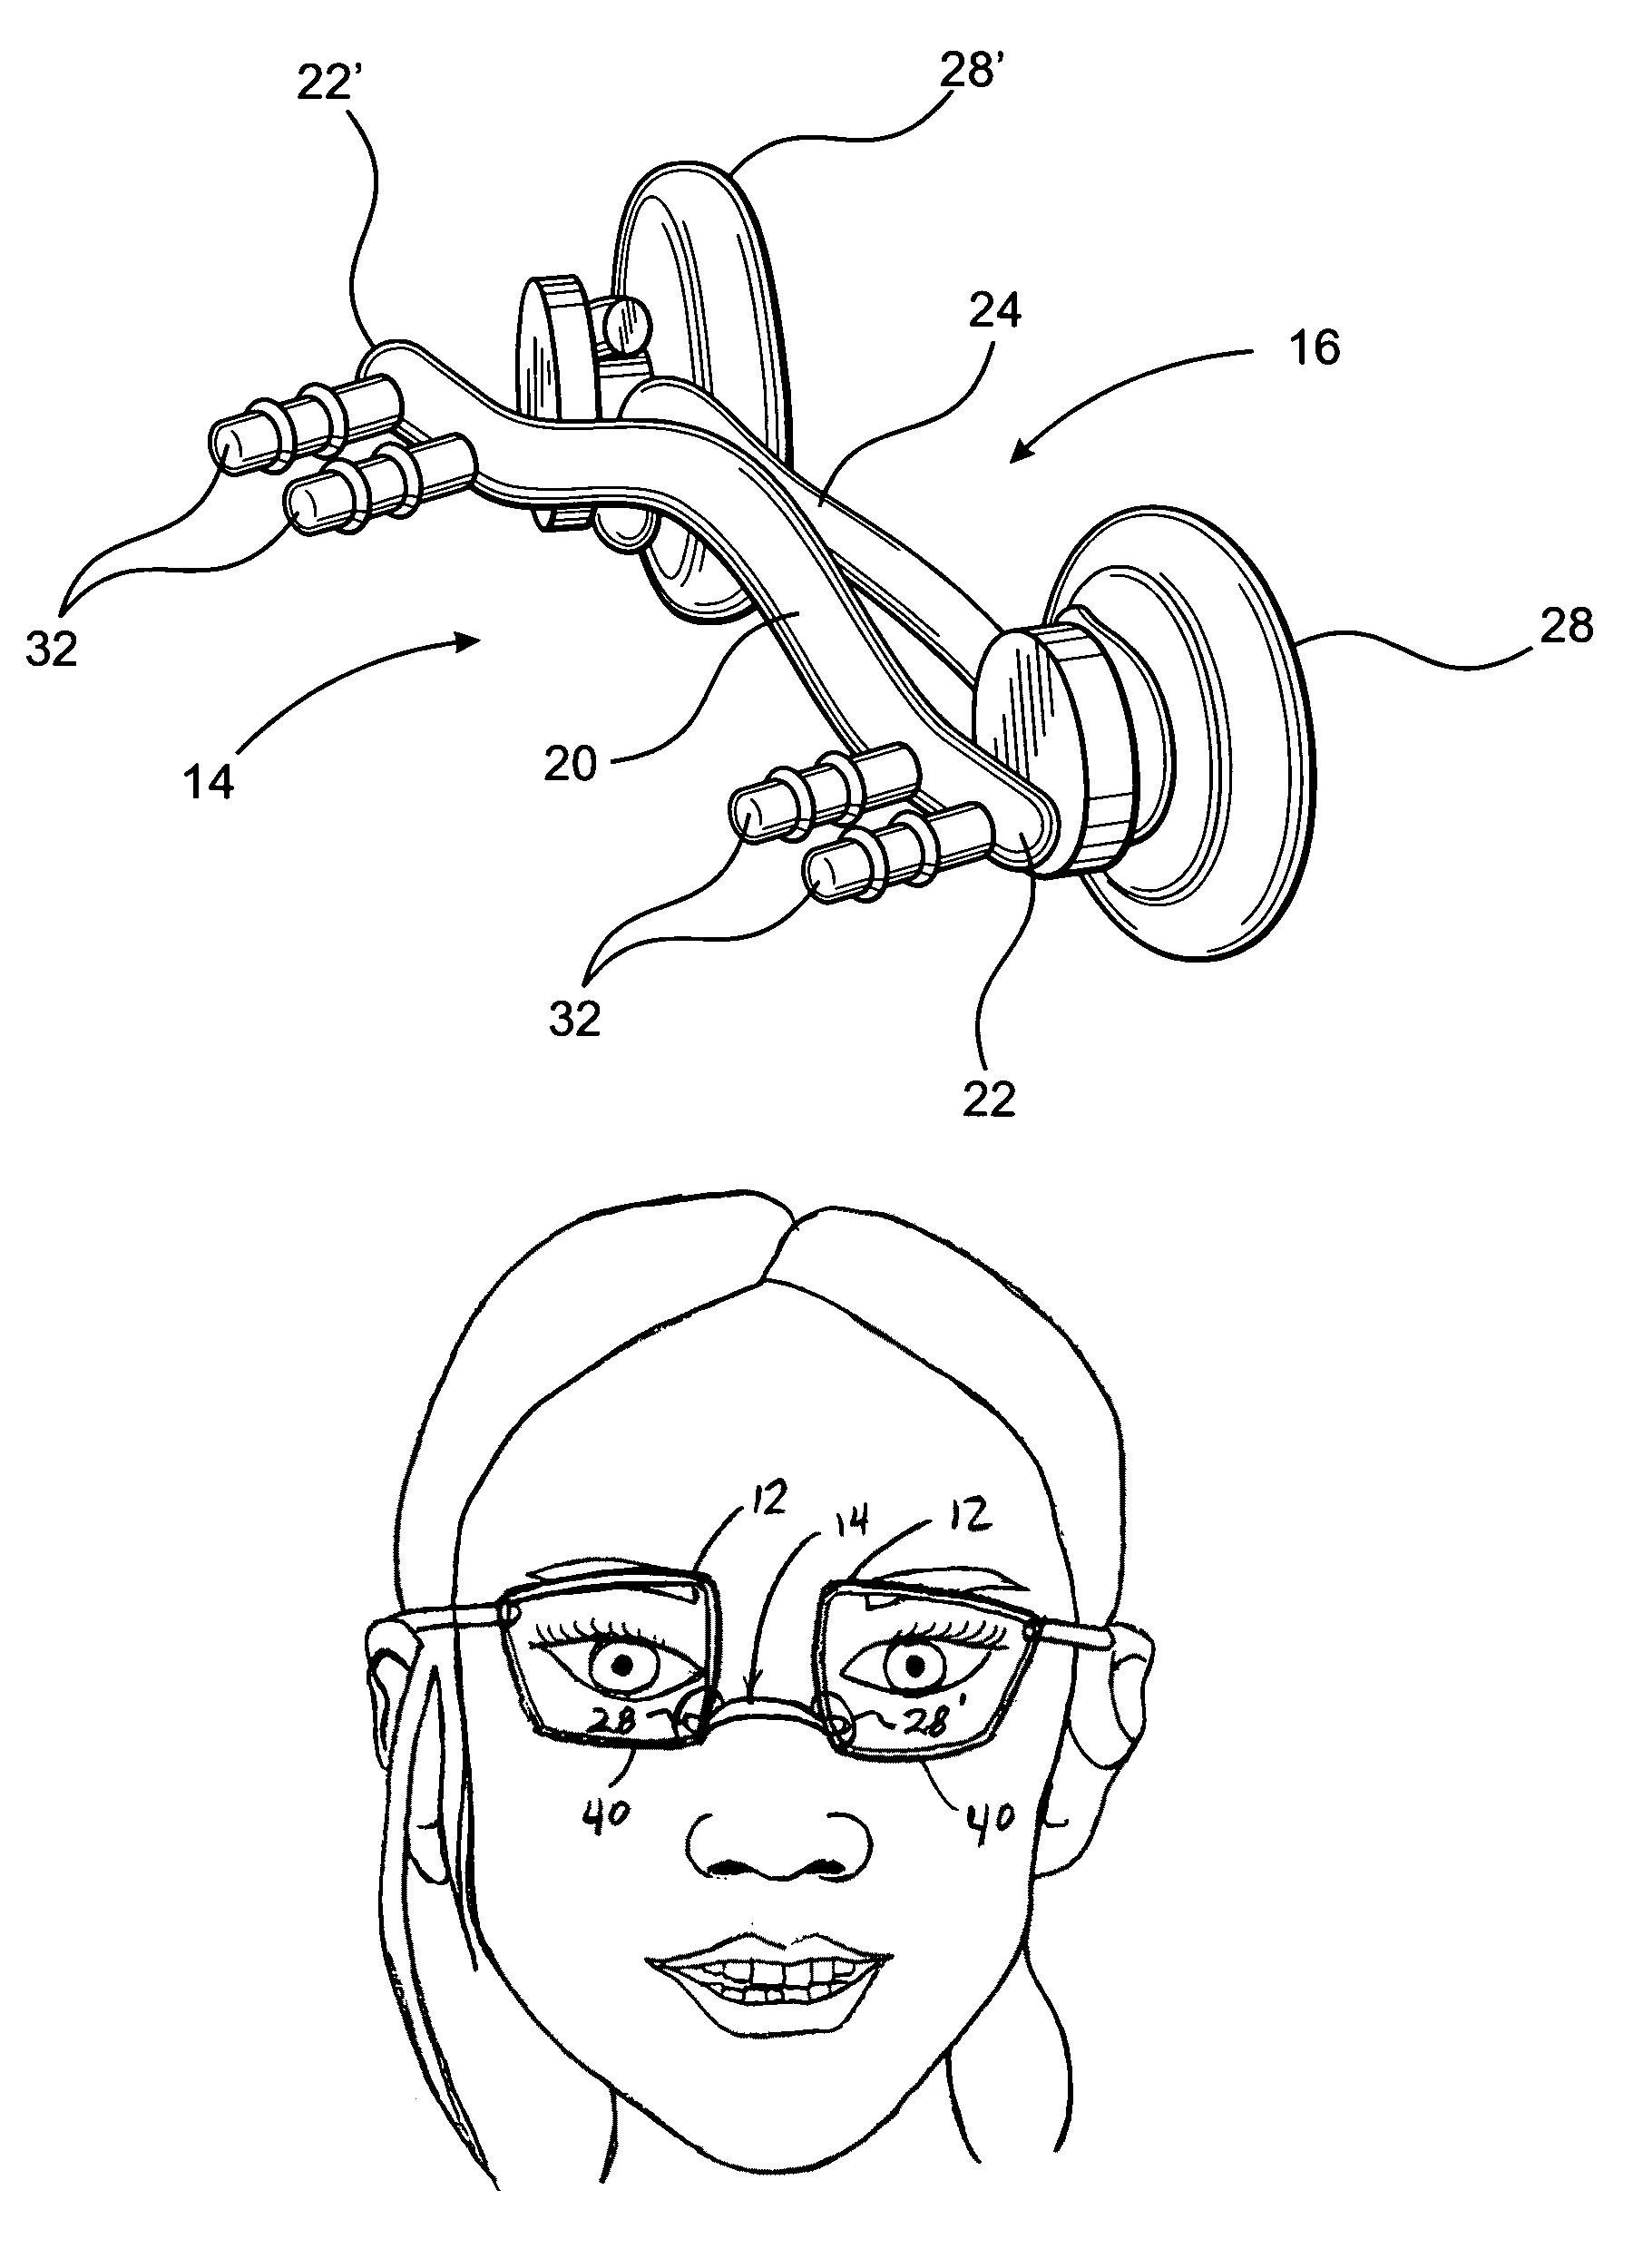 Spectacle assembly for faces without a prominent upper nasal support